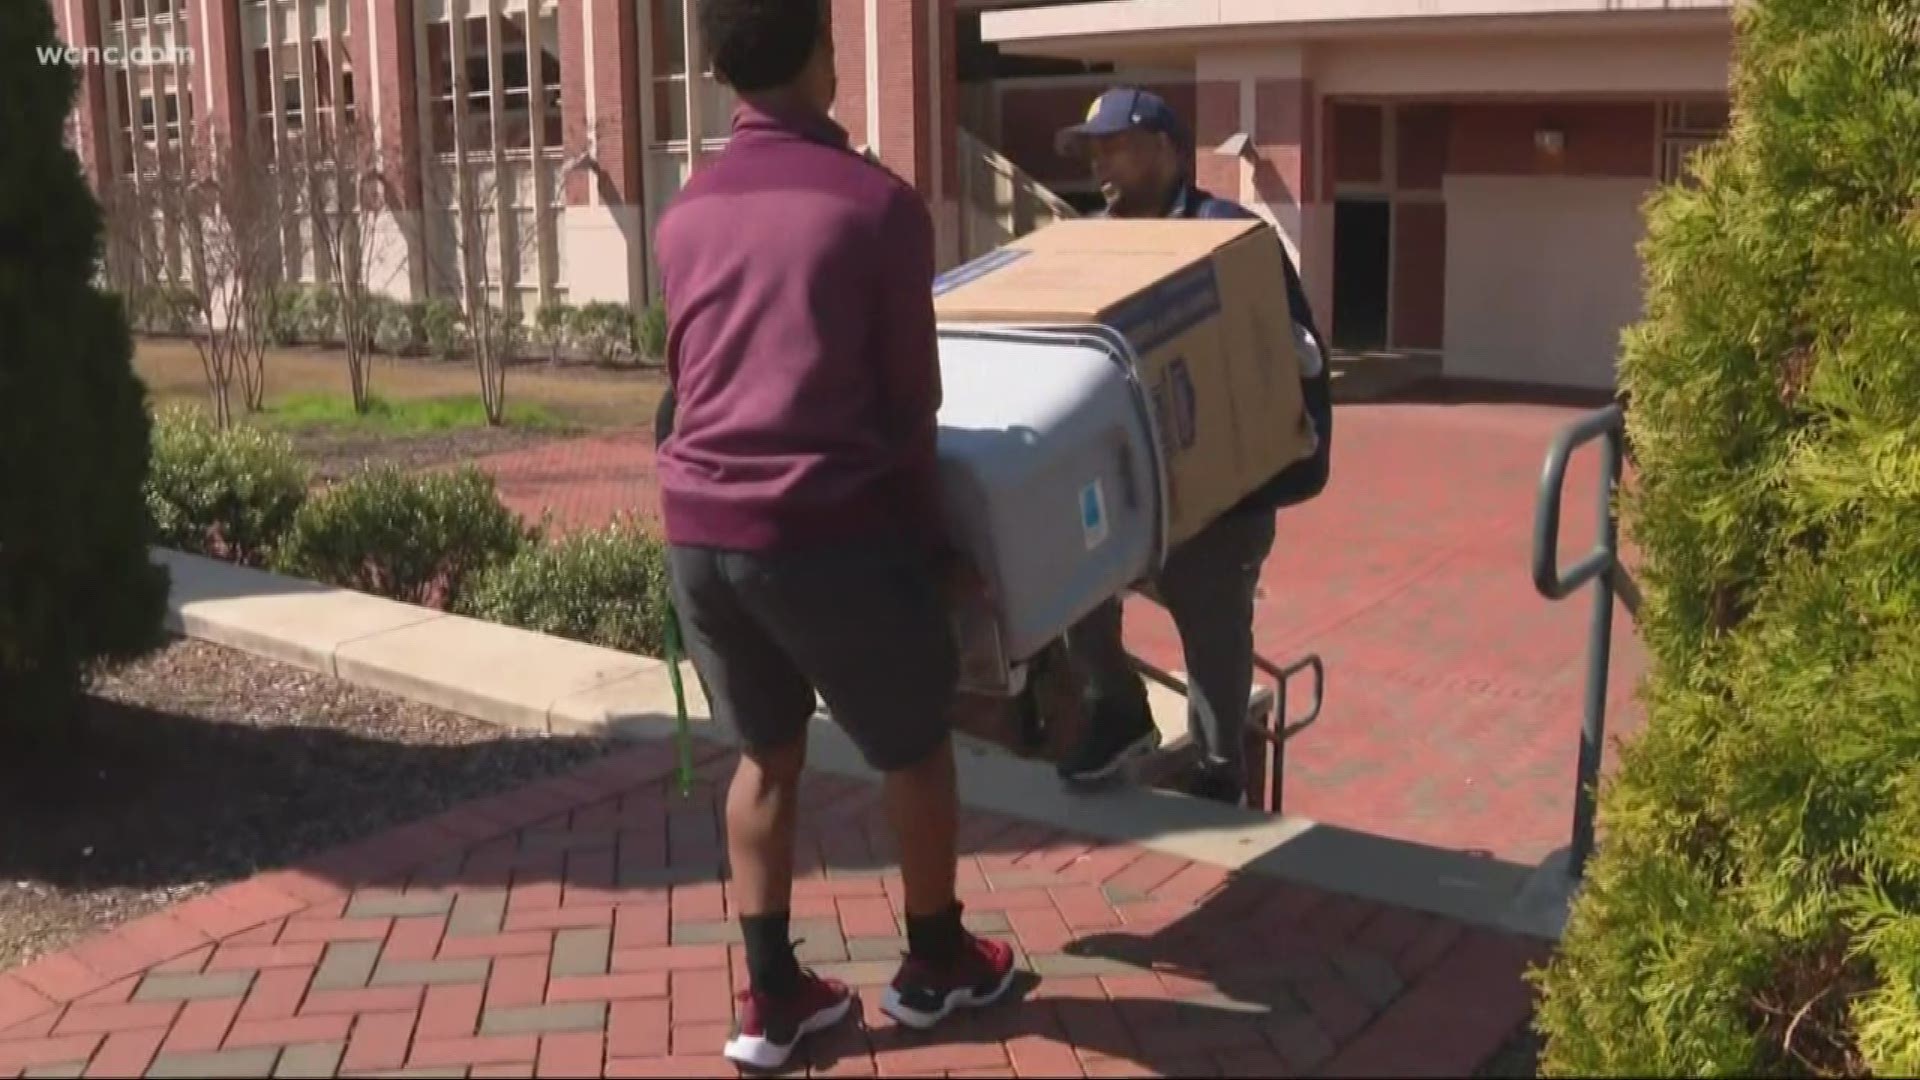 The university said students had the option to only take essential belongings and leave the rest to pick up at a later date.